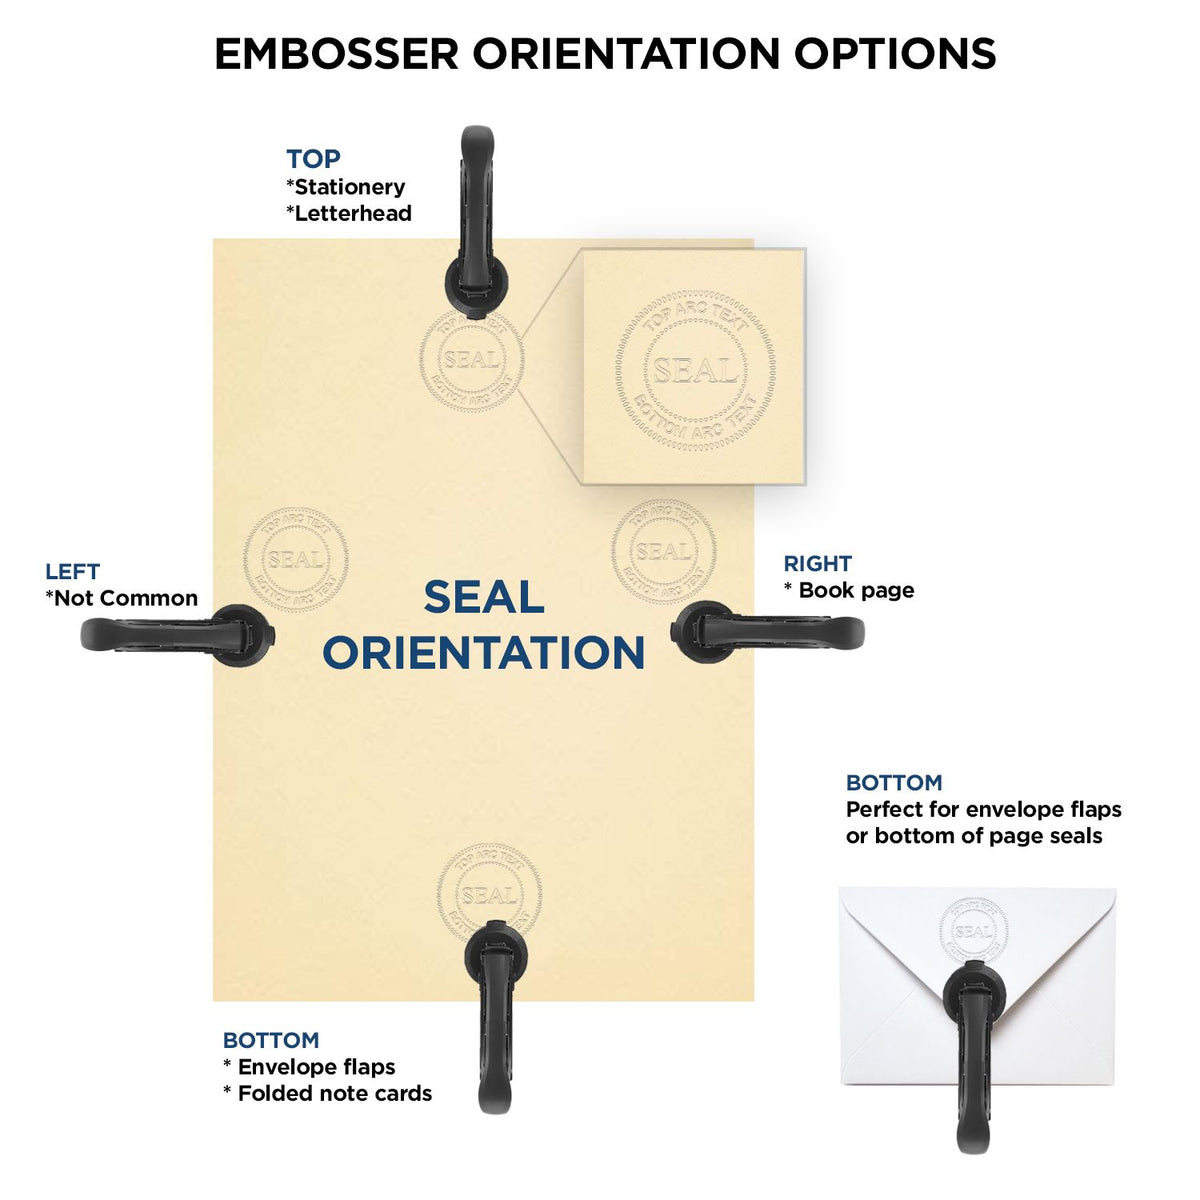 An infographic for the Heavy Duty Cast Iron Virginia Geologist Seal Embosser showing embosser orientation, this is showing examples of a top, bottom, right and left insert.